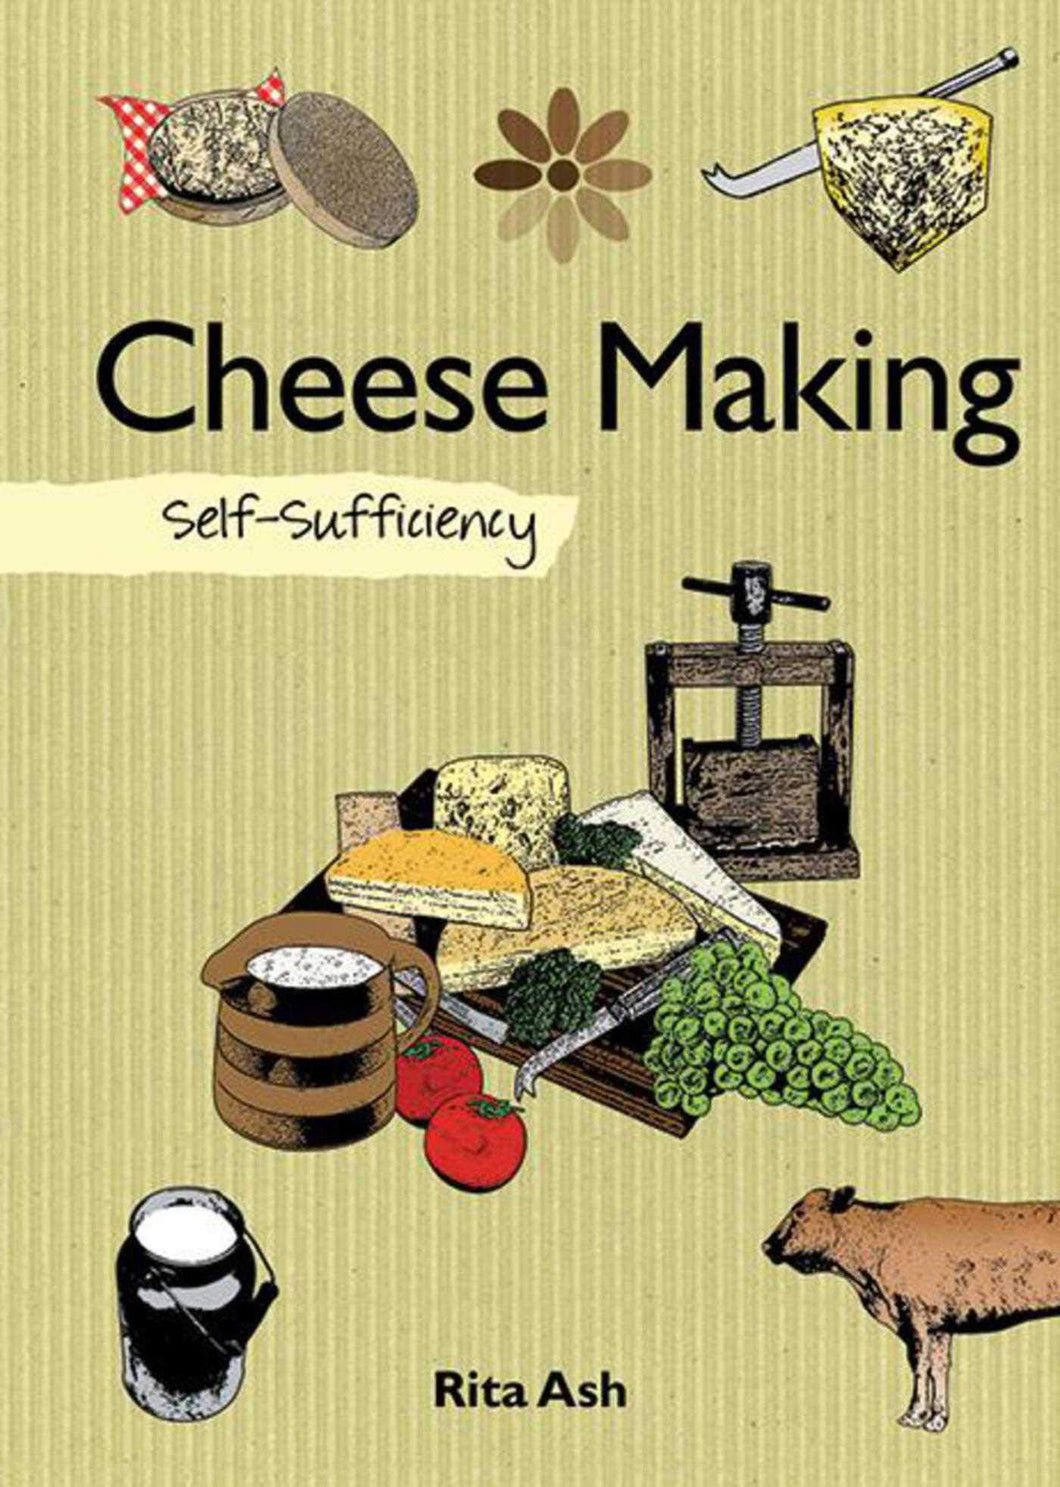 Self-Sufficiency: Cheese Making